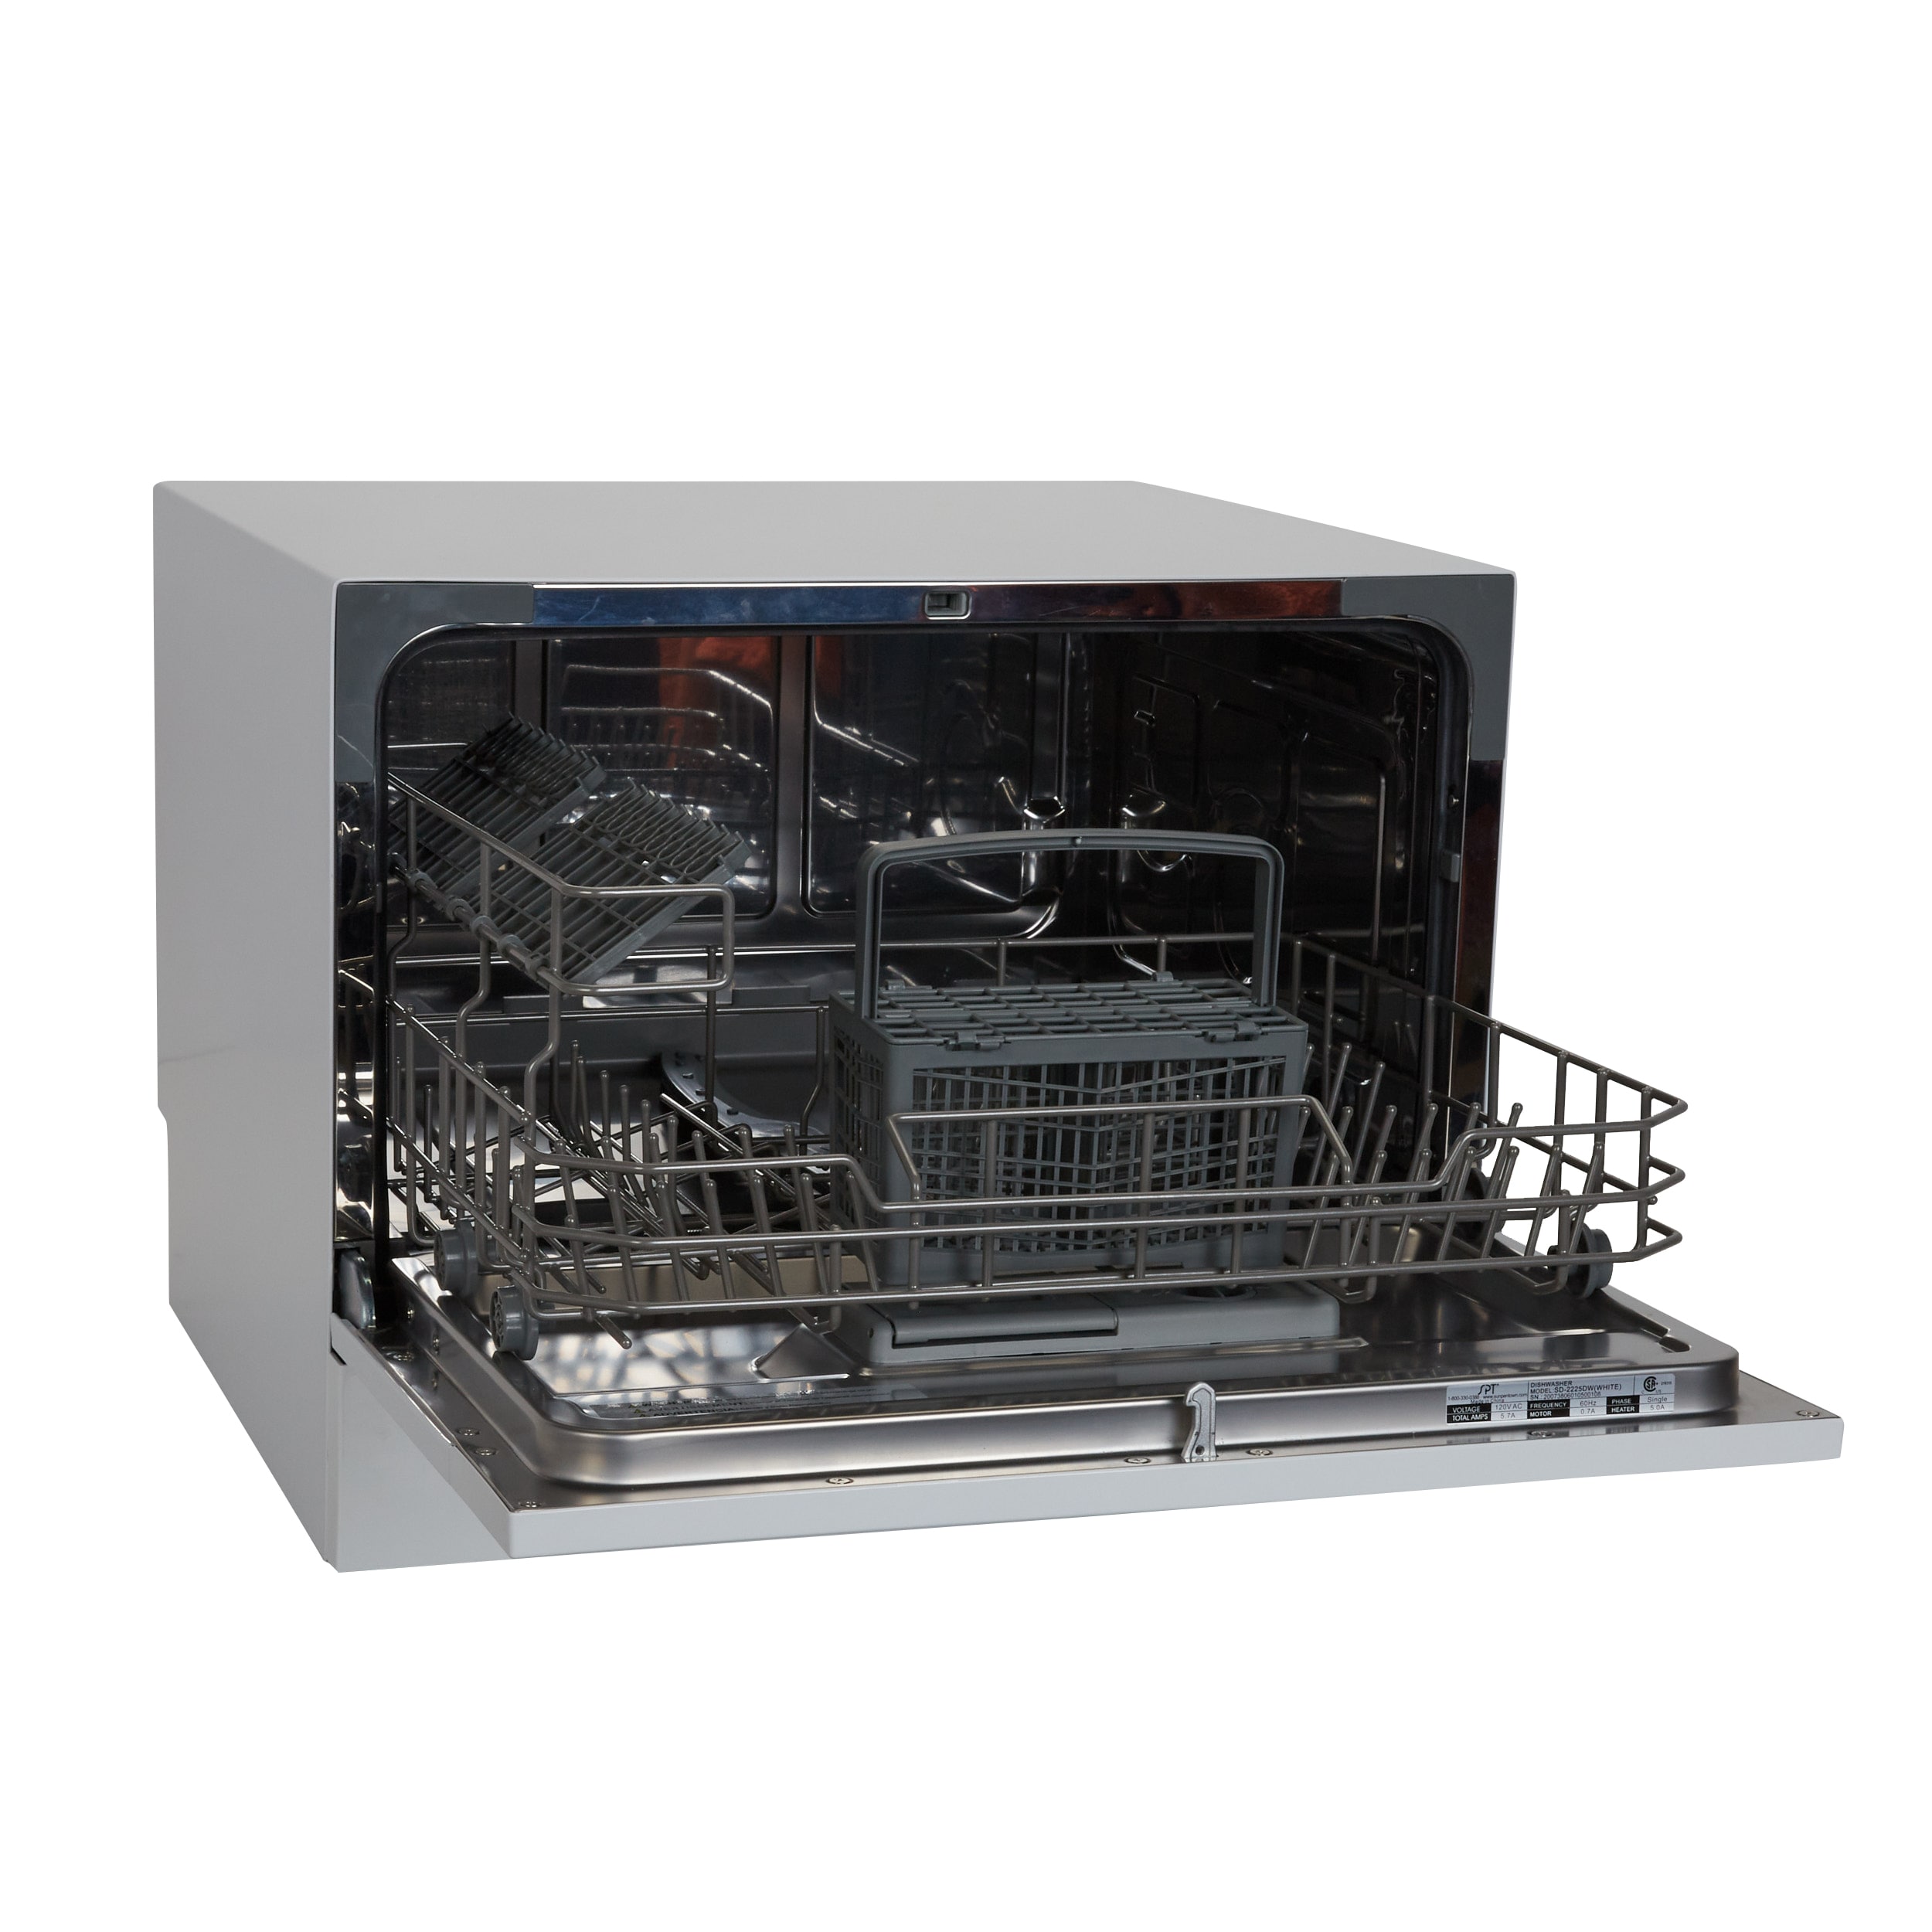 Comfee' 16.5 in. White Electronic Countertop 120-volt Dishwasher